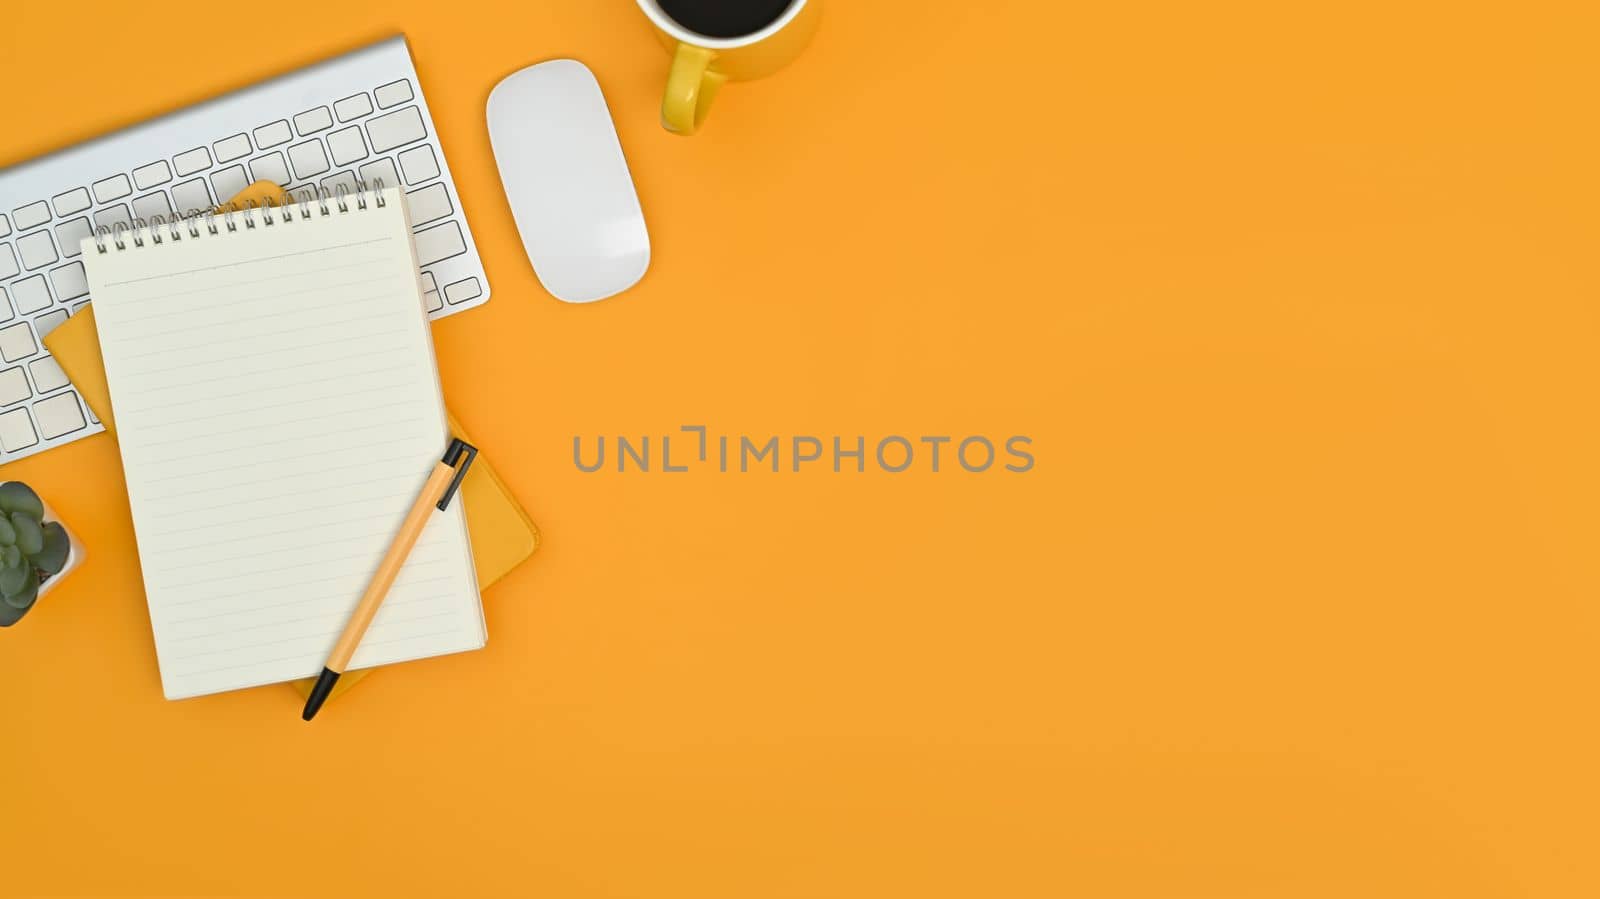 Top view of notepad, keyboard, mouse and coffee cup on yellow background. Copy space for your text by prathanchorruangsak